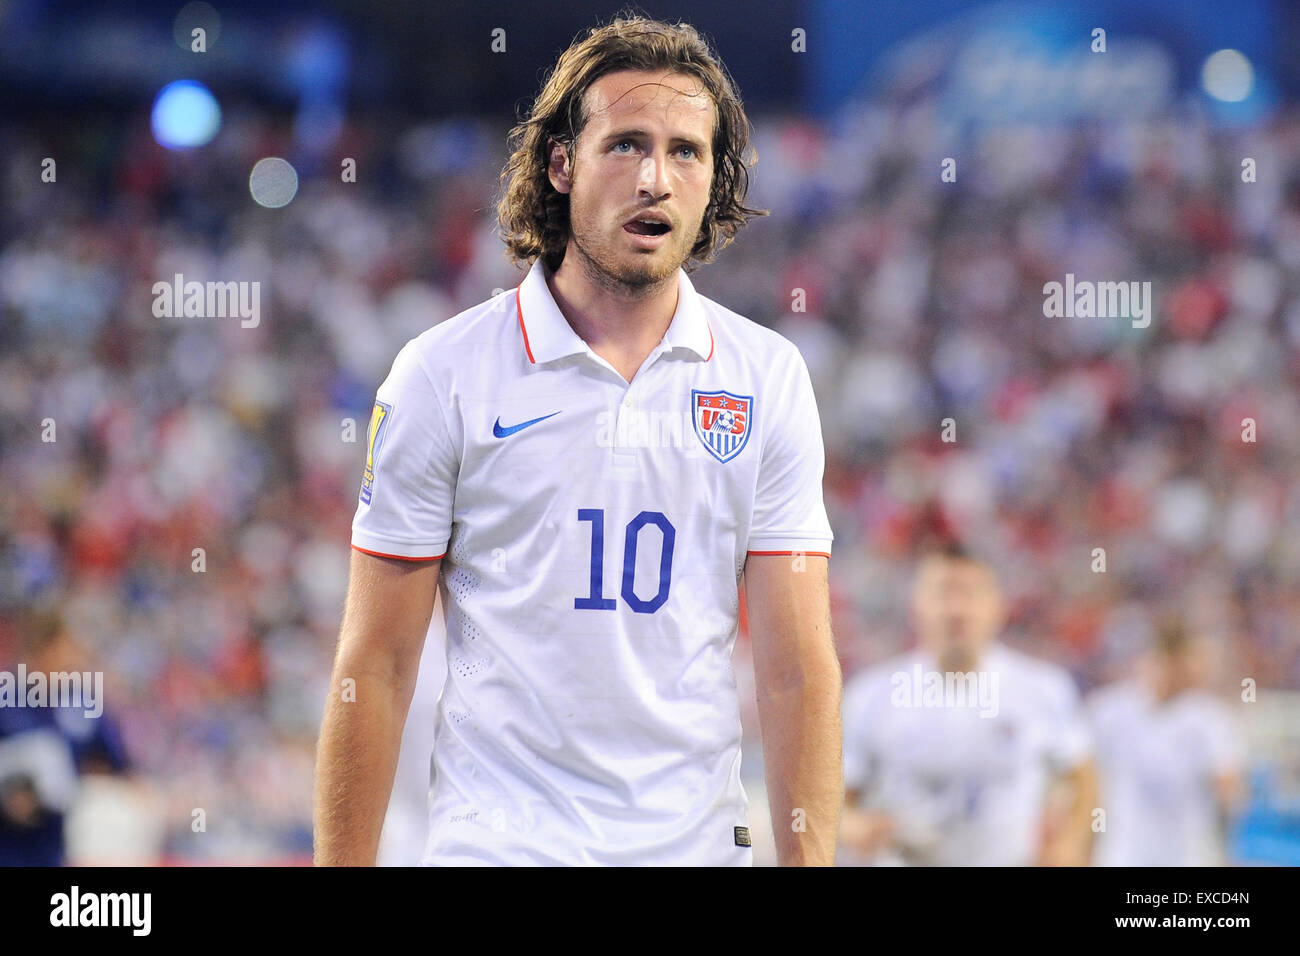 Foxborough, Massachusetts, USA. 10th July, 2015. United States midfielder Mix Diskerud (10) leaves the pitch at halftime during the CONCACAF Gold Cup group stage match between USA and Haiti held at Gillette Stadium, in Foxborough Massachusetts. USA defeated Haiti 1-0. Eric Canha/CSM/Alamy Live News Stock Photo